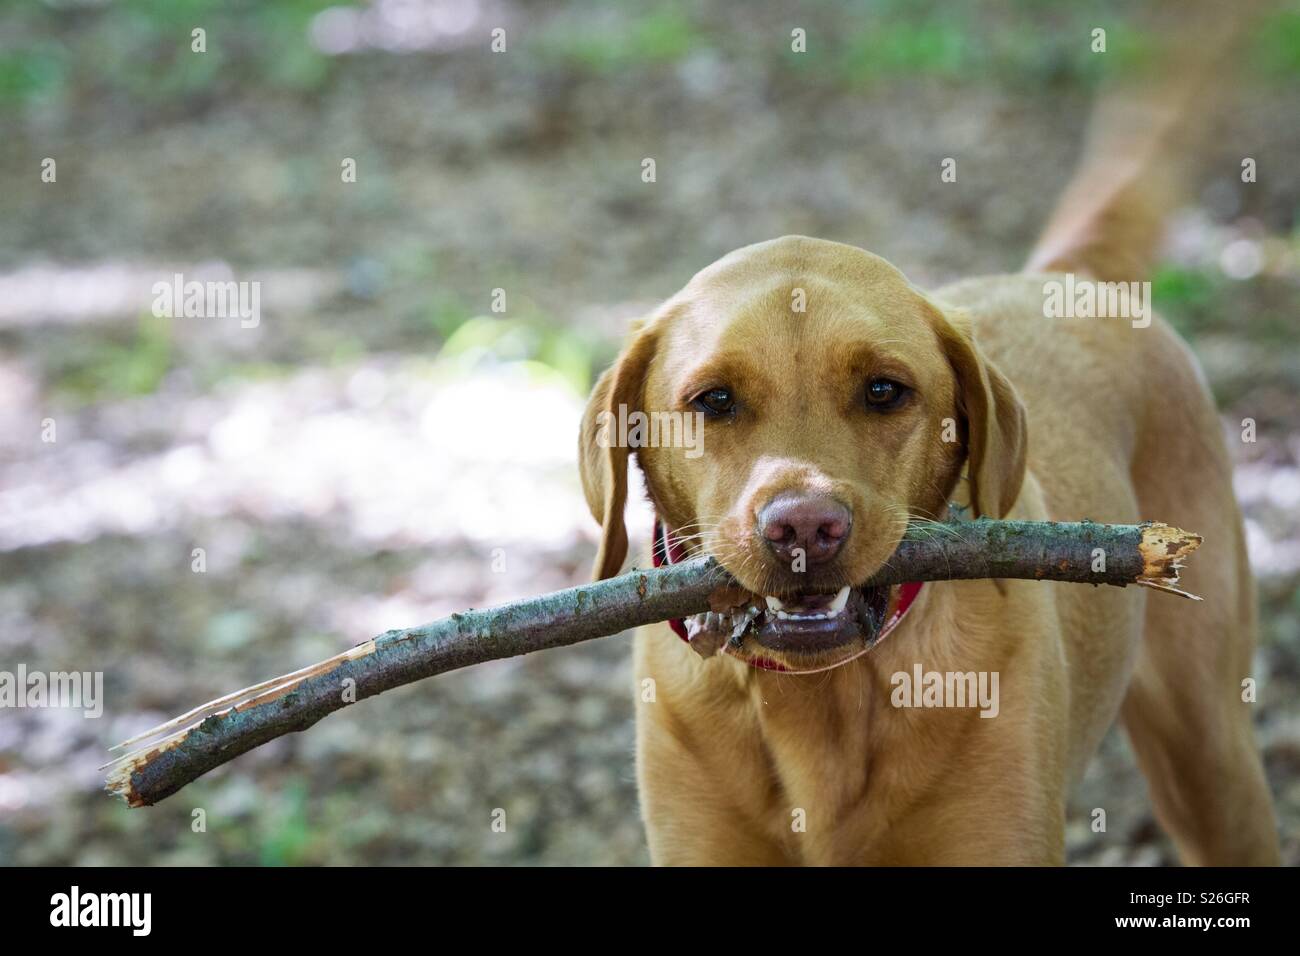 A cheeky pet dog carrying a stick in it’s mouth during a dog walk through woods Stock Photo